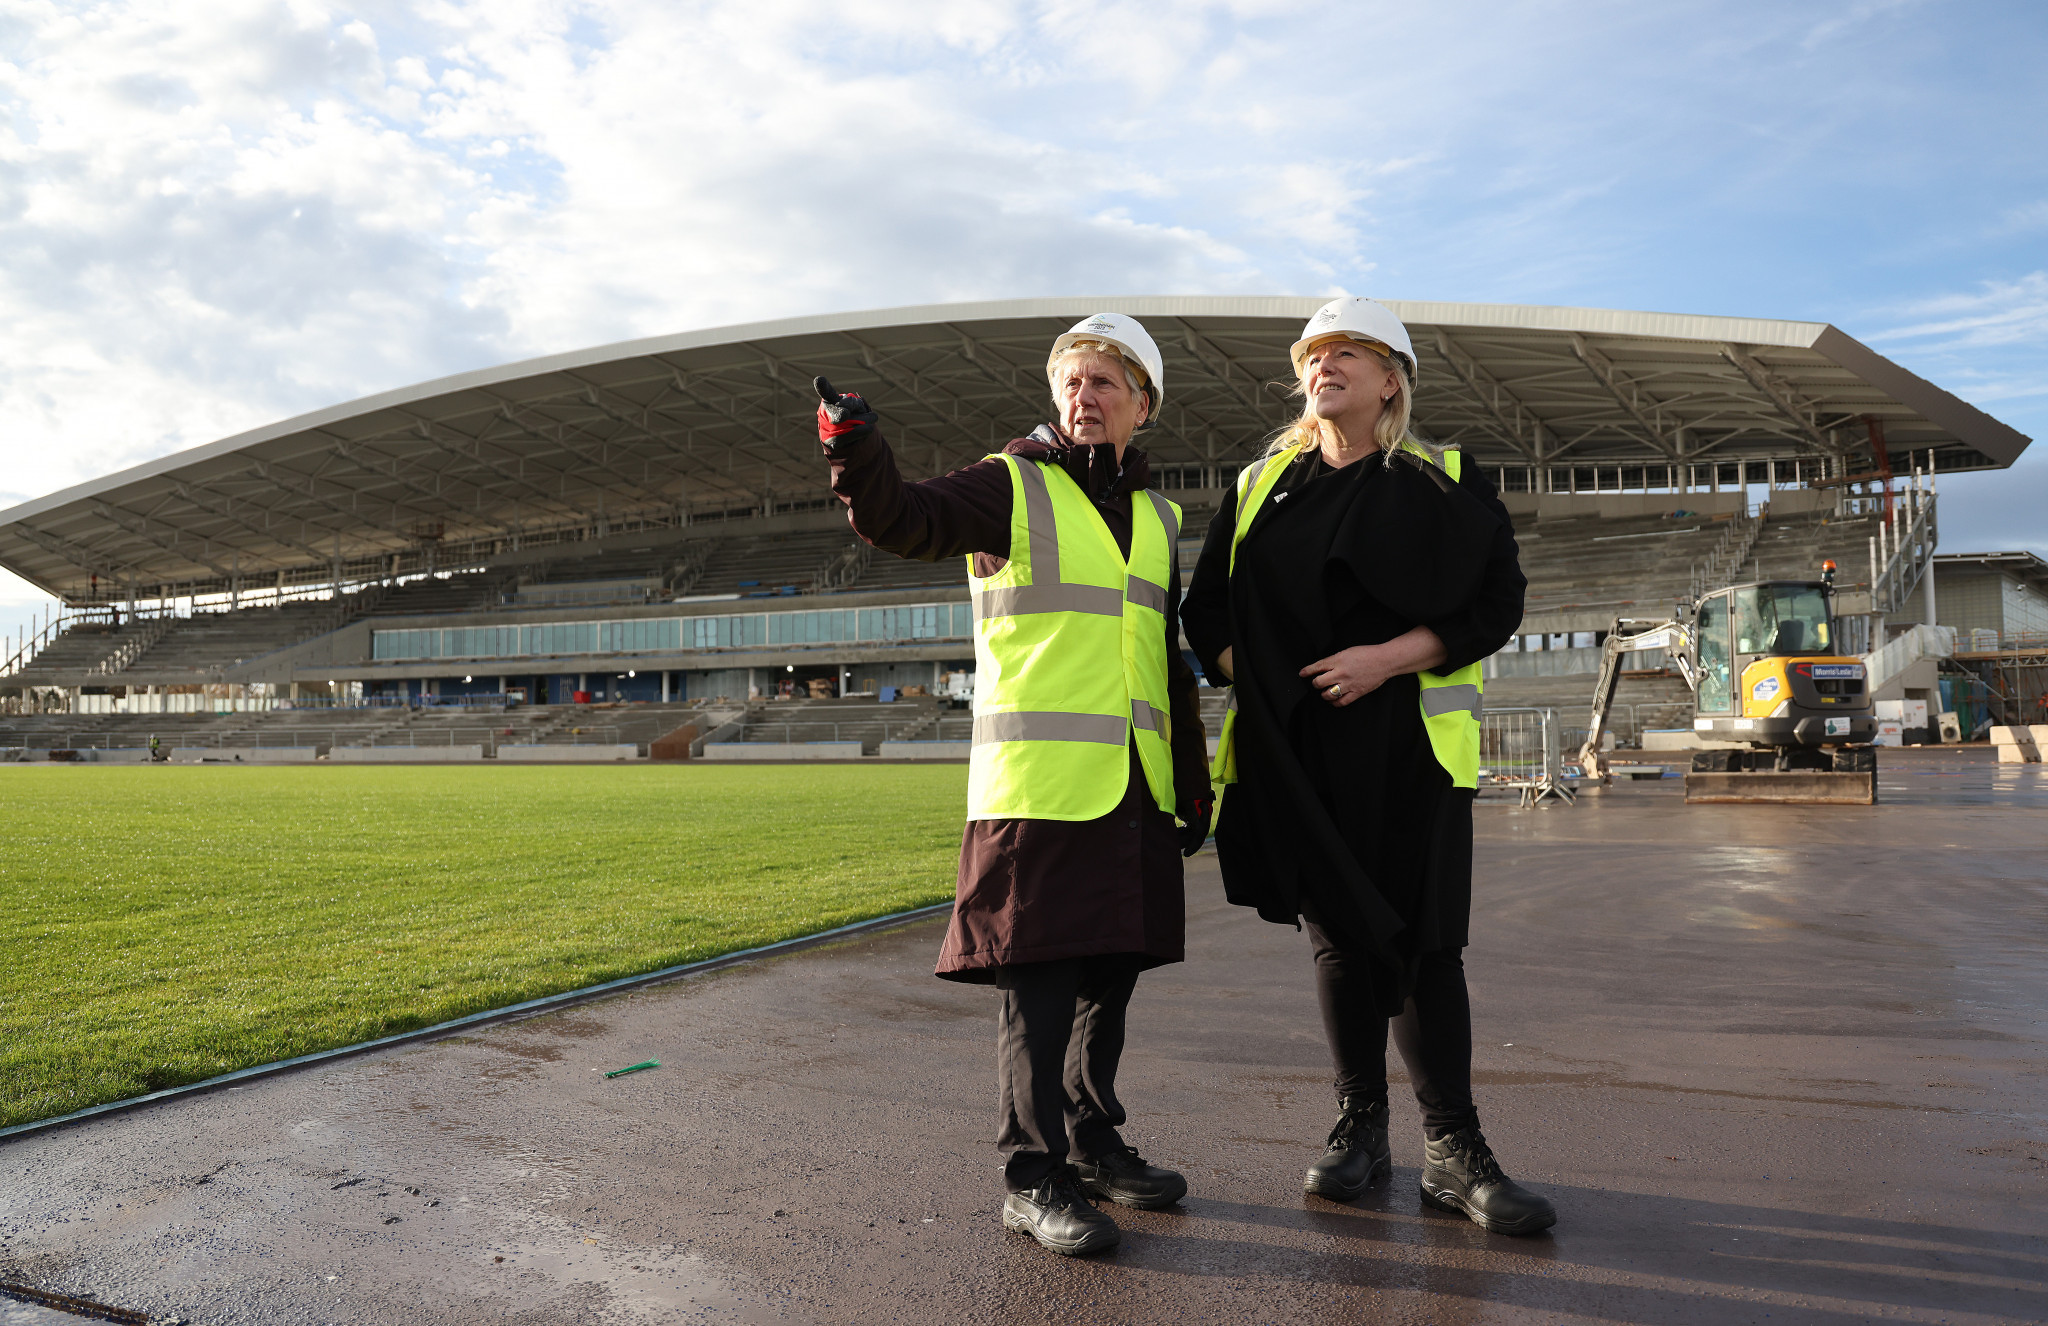 Dame Louise and Sadleir check out the venue for the Opening and Closing Ceremonies and athletics events ©Birmingham 2022